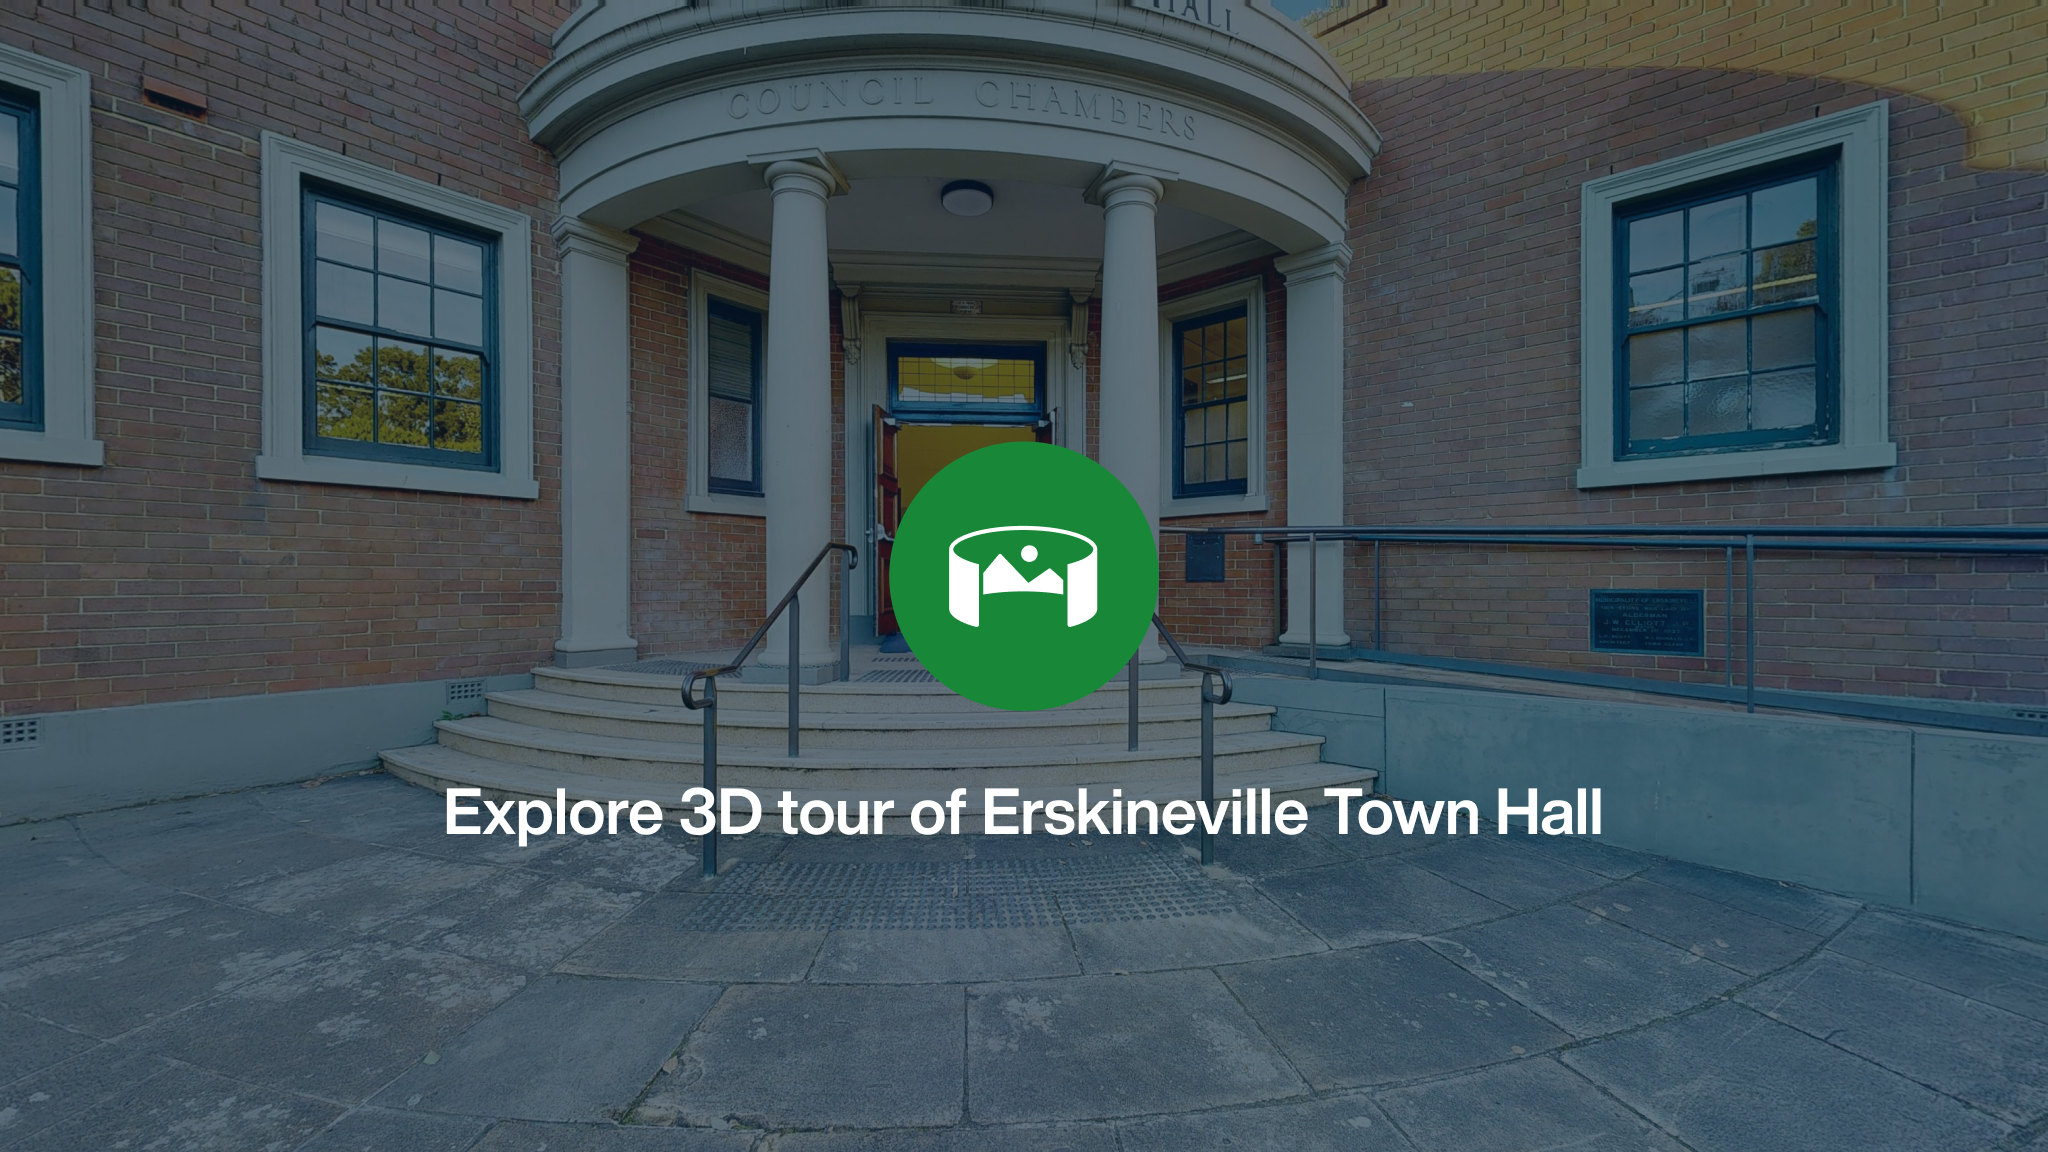 The front entrance to Erskineville Town Hall  overlayed with a green icon and the words Explore 3D tour of Erskineville Town Hall.